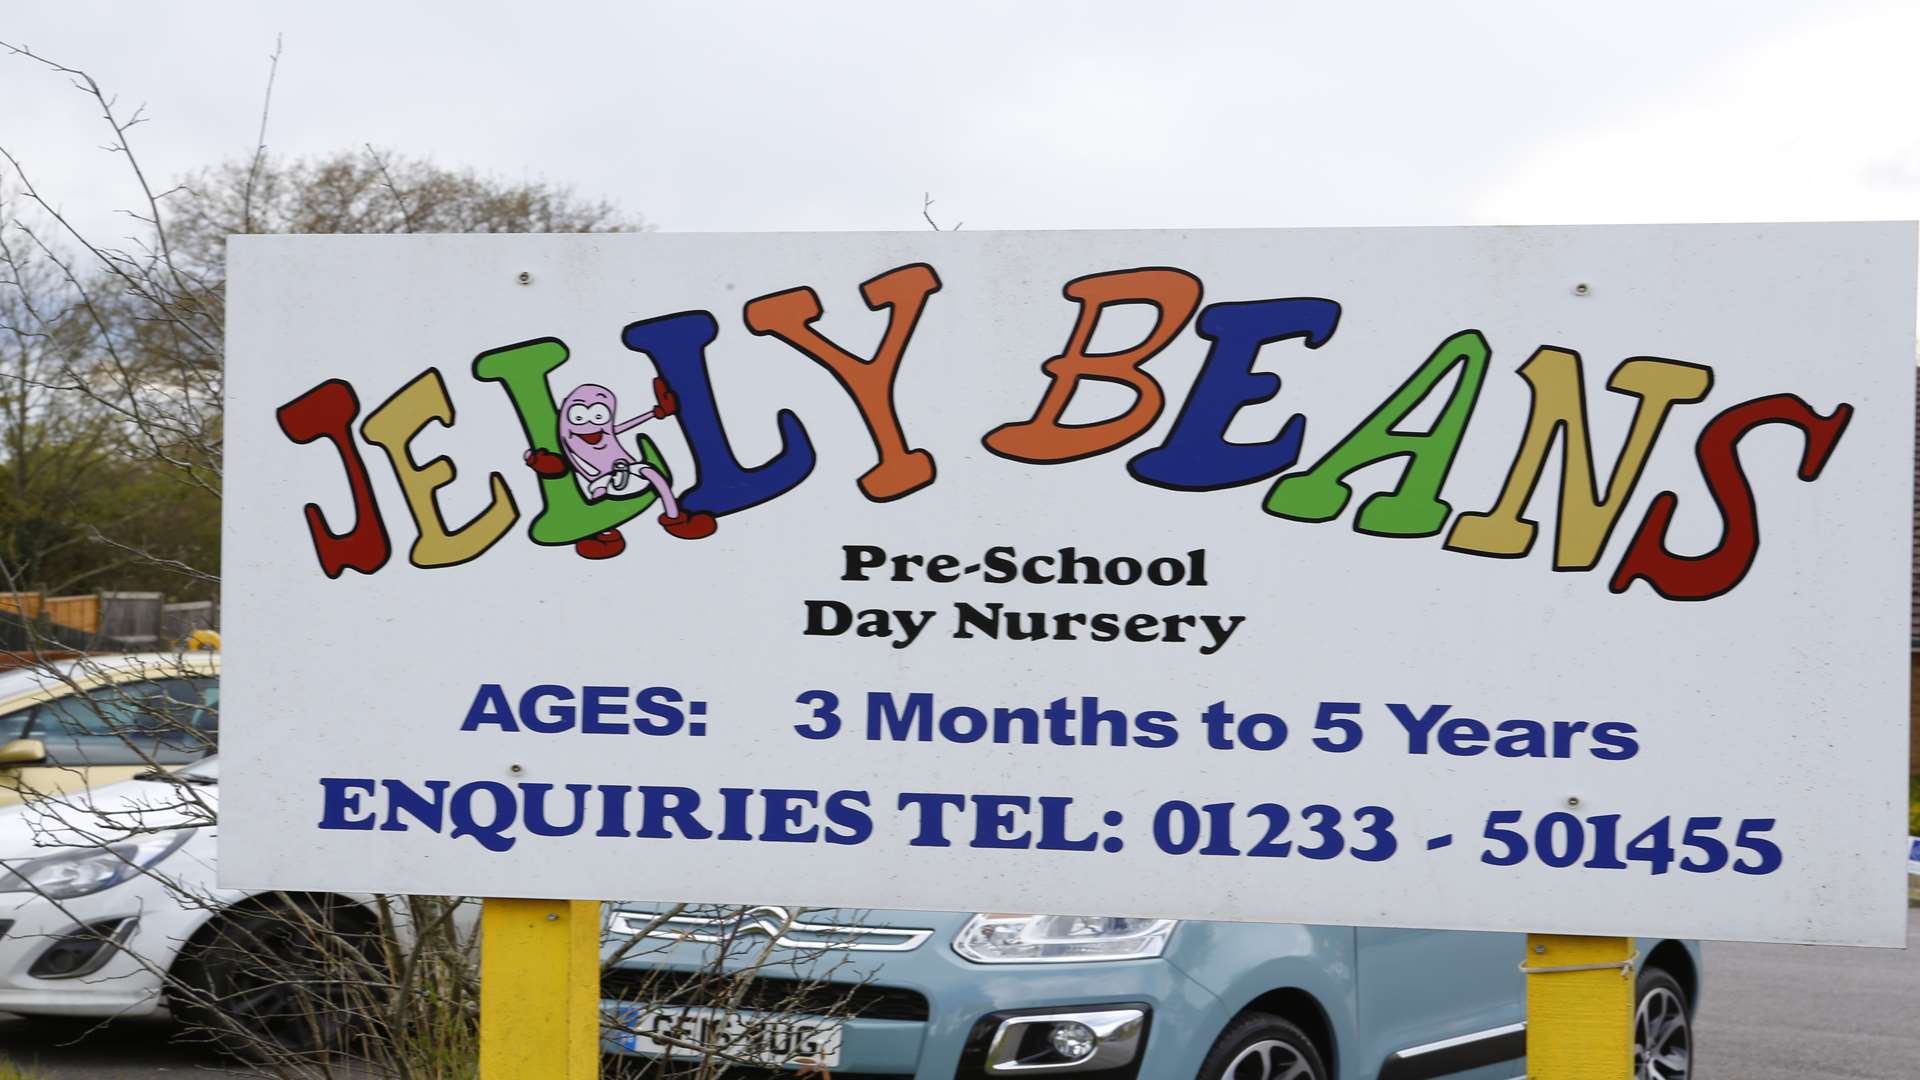 Jelly Beans Day Care Nursery in Ashford